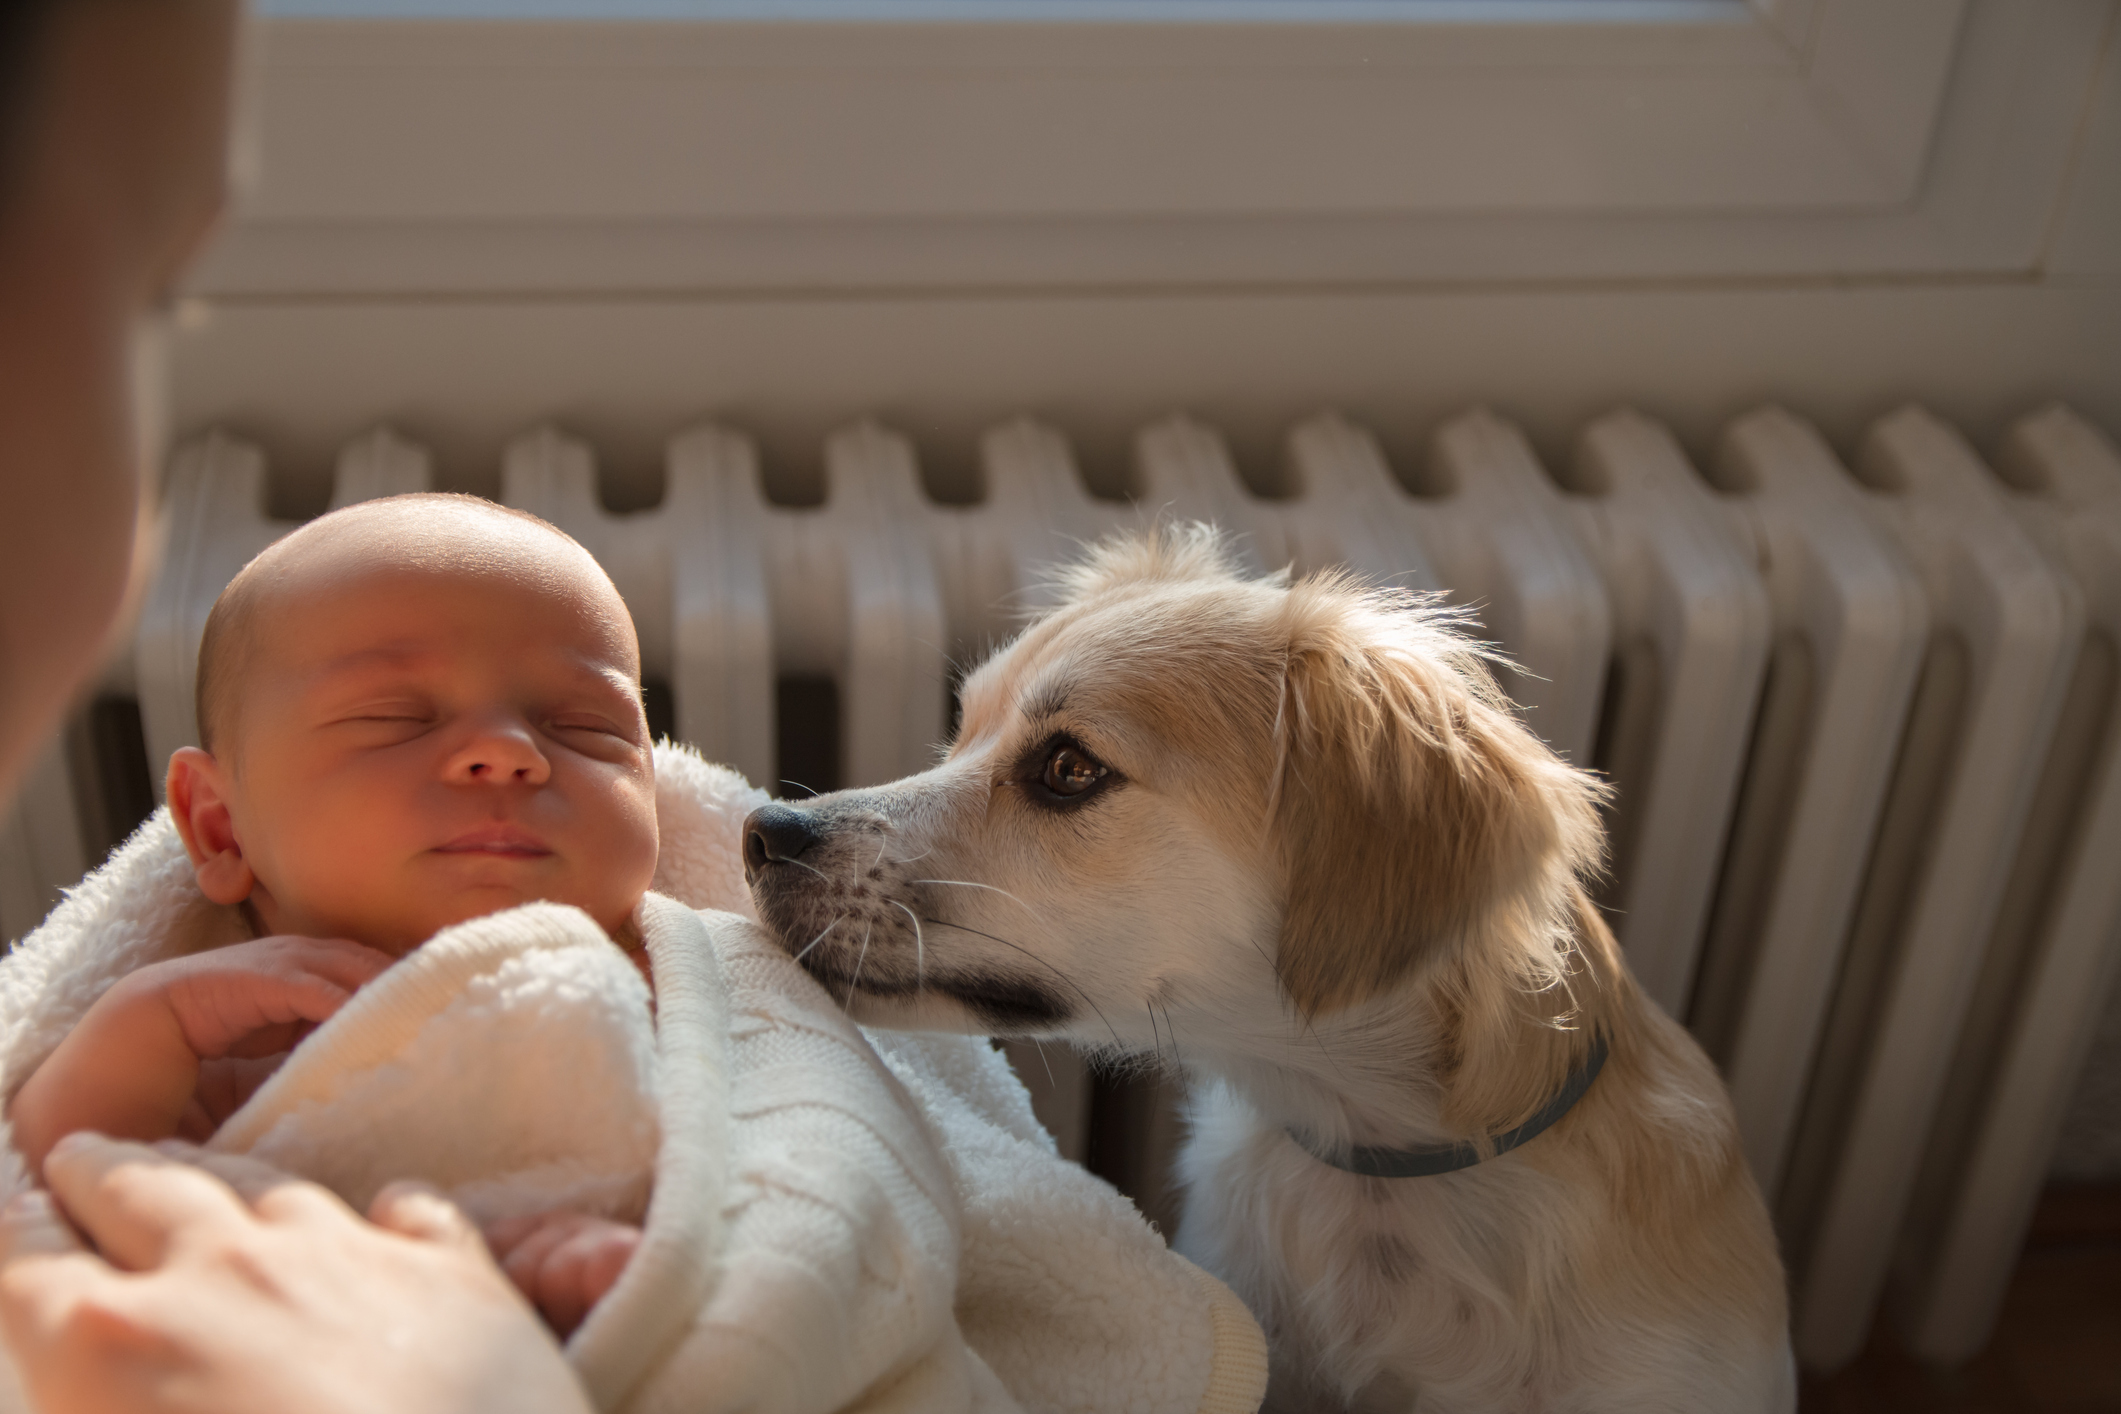 Dog Meets Owner’s Newborn Daughter for First Time in ‘Touching’ Video